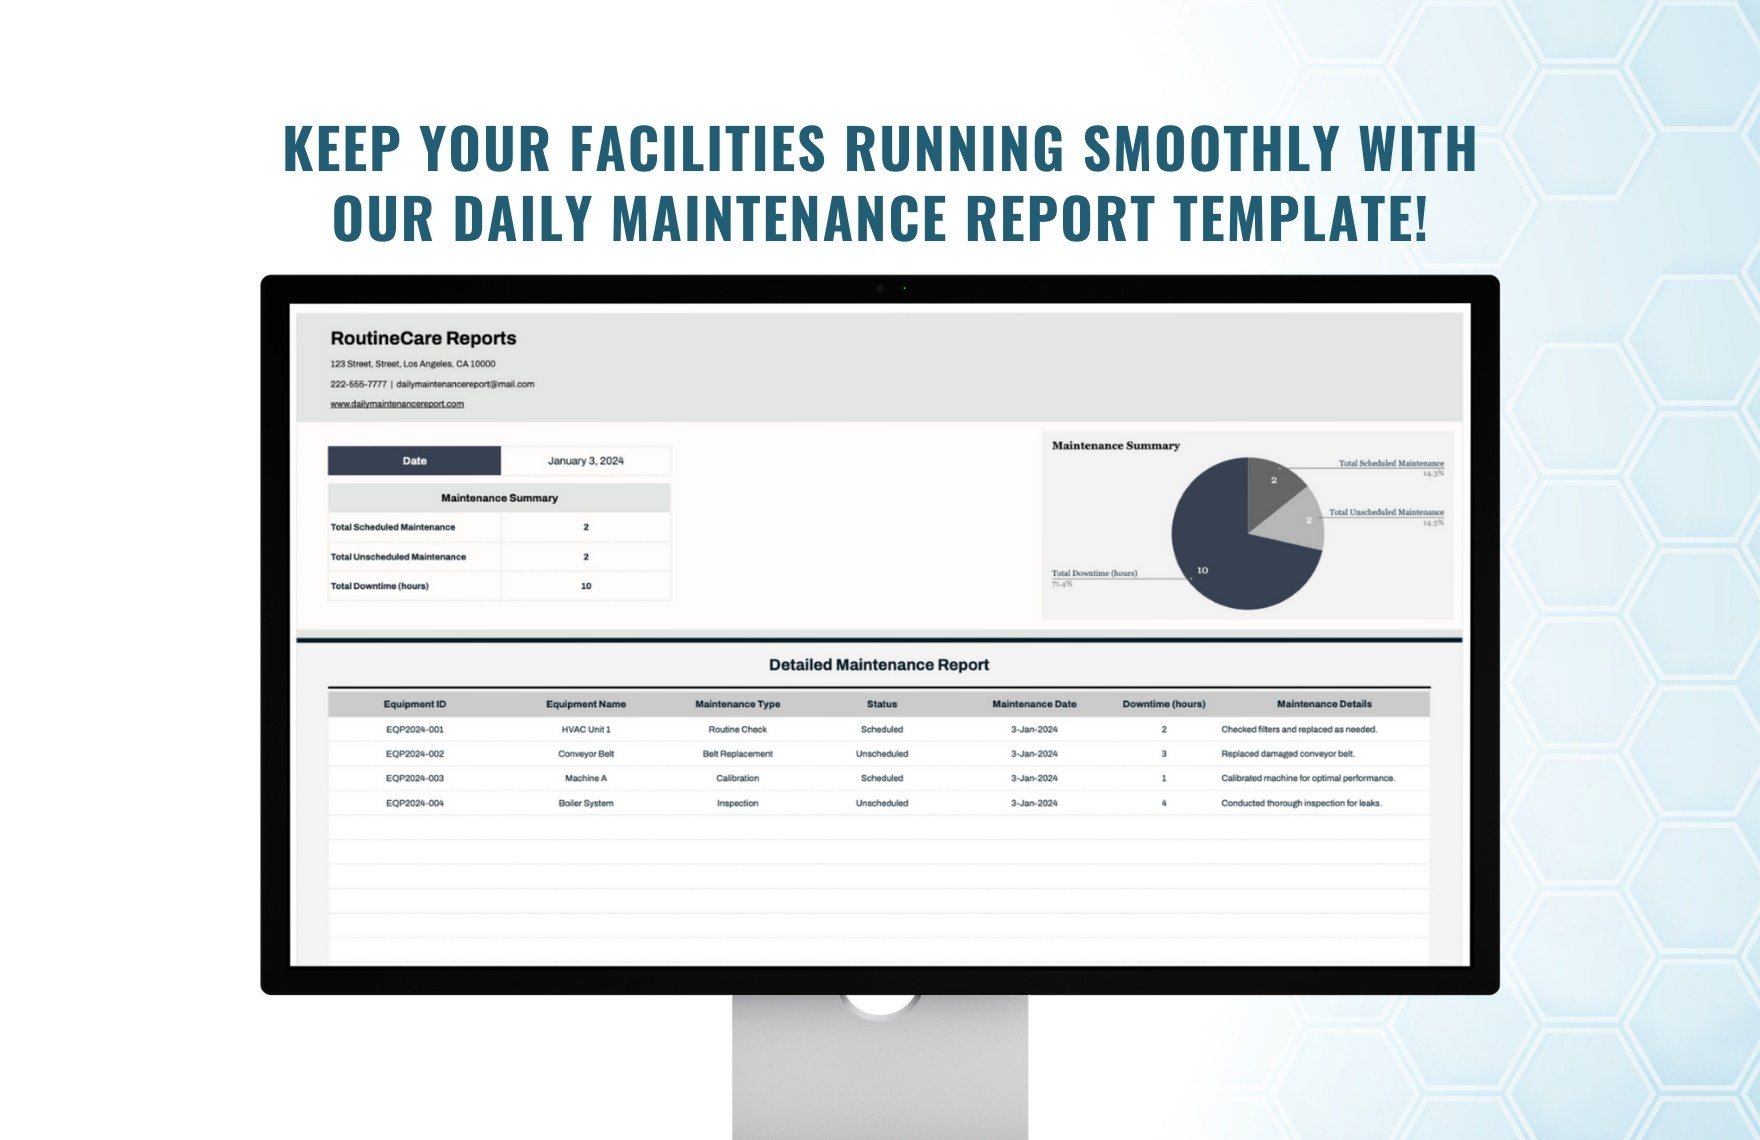 Daily Maintenance Report Template